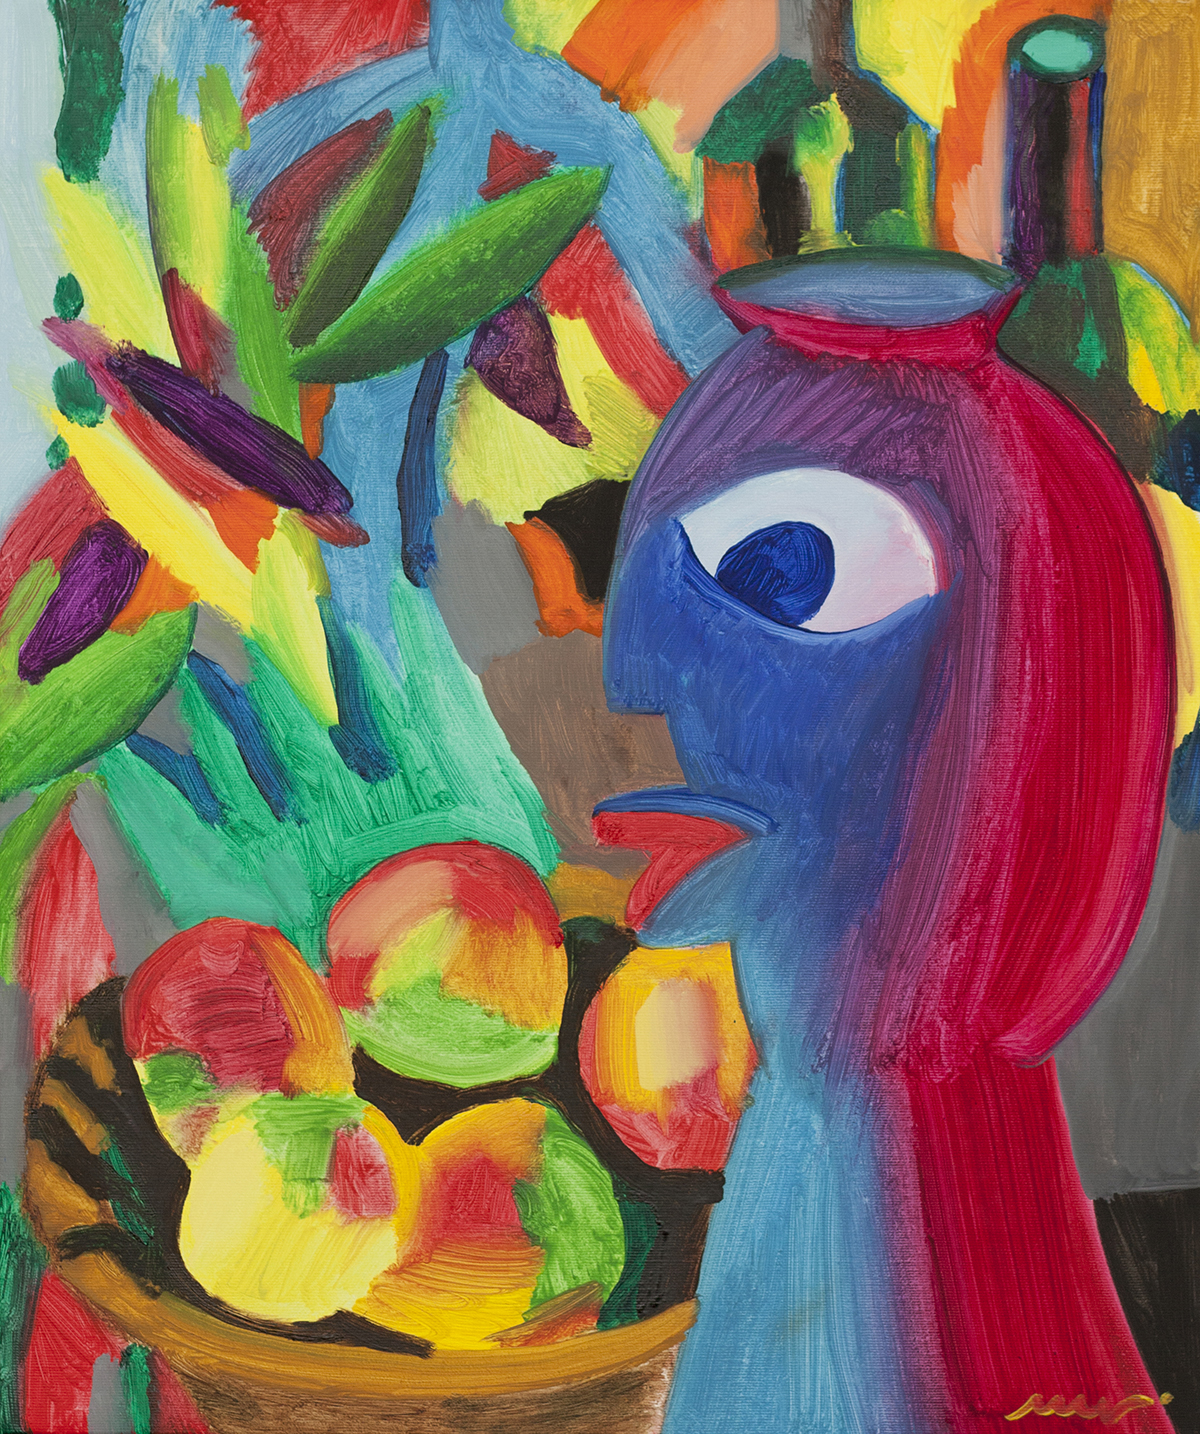 Still Life with Apples and a Vase, Oil on Canvas, 55x46 cm. 2019